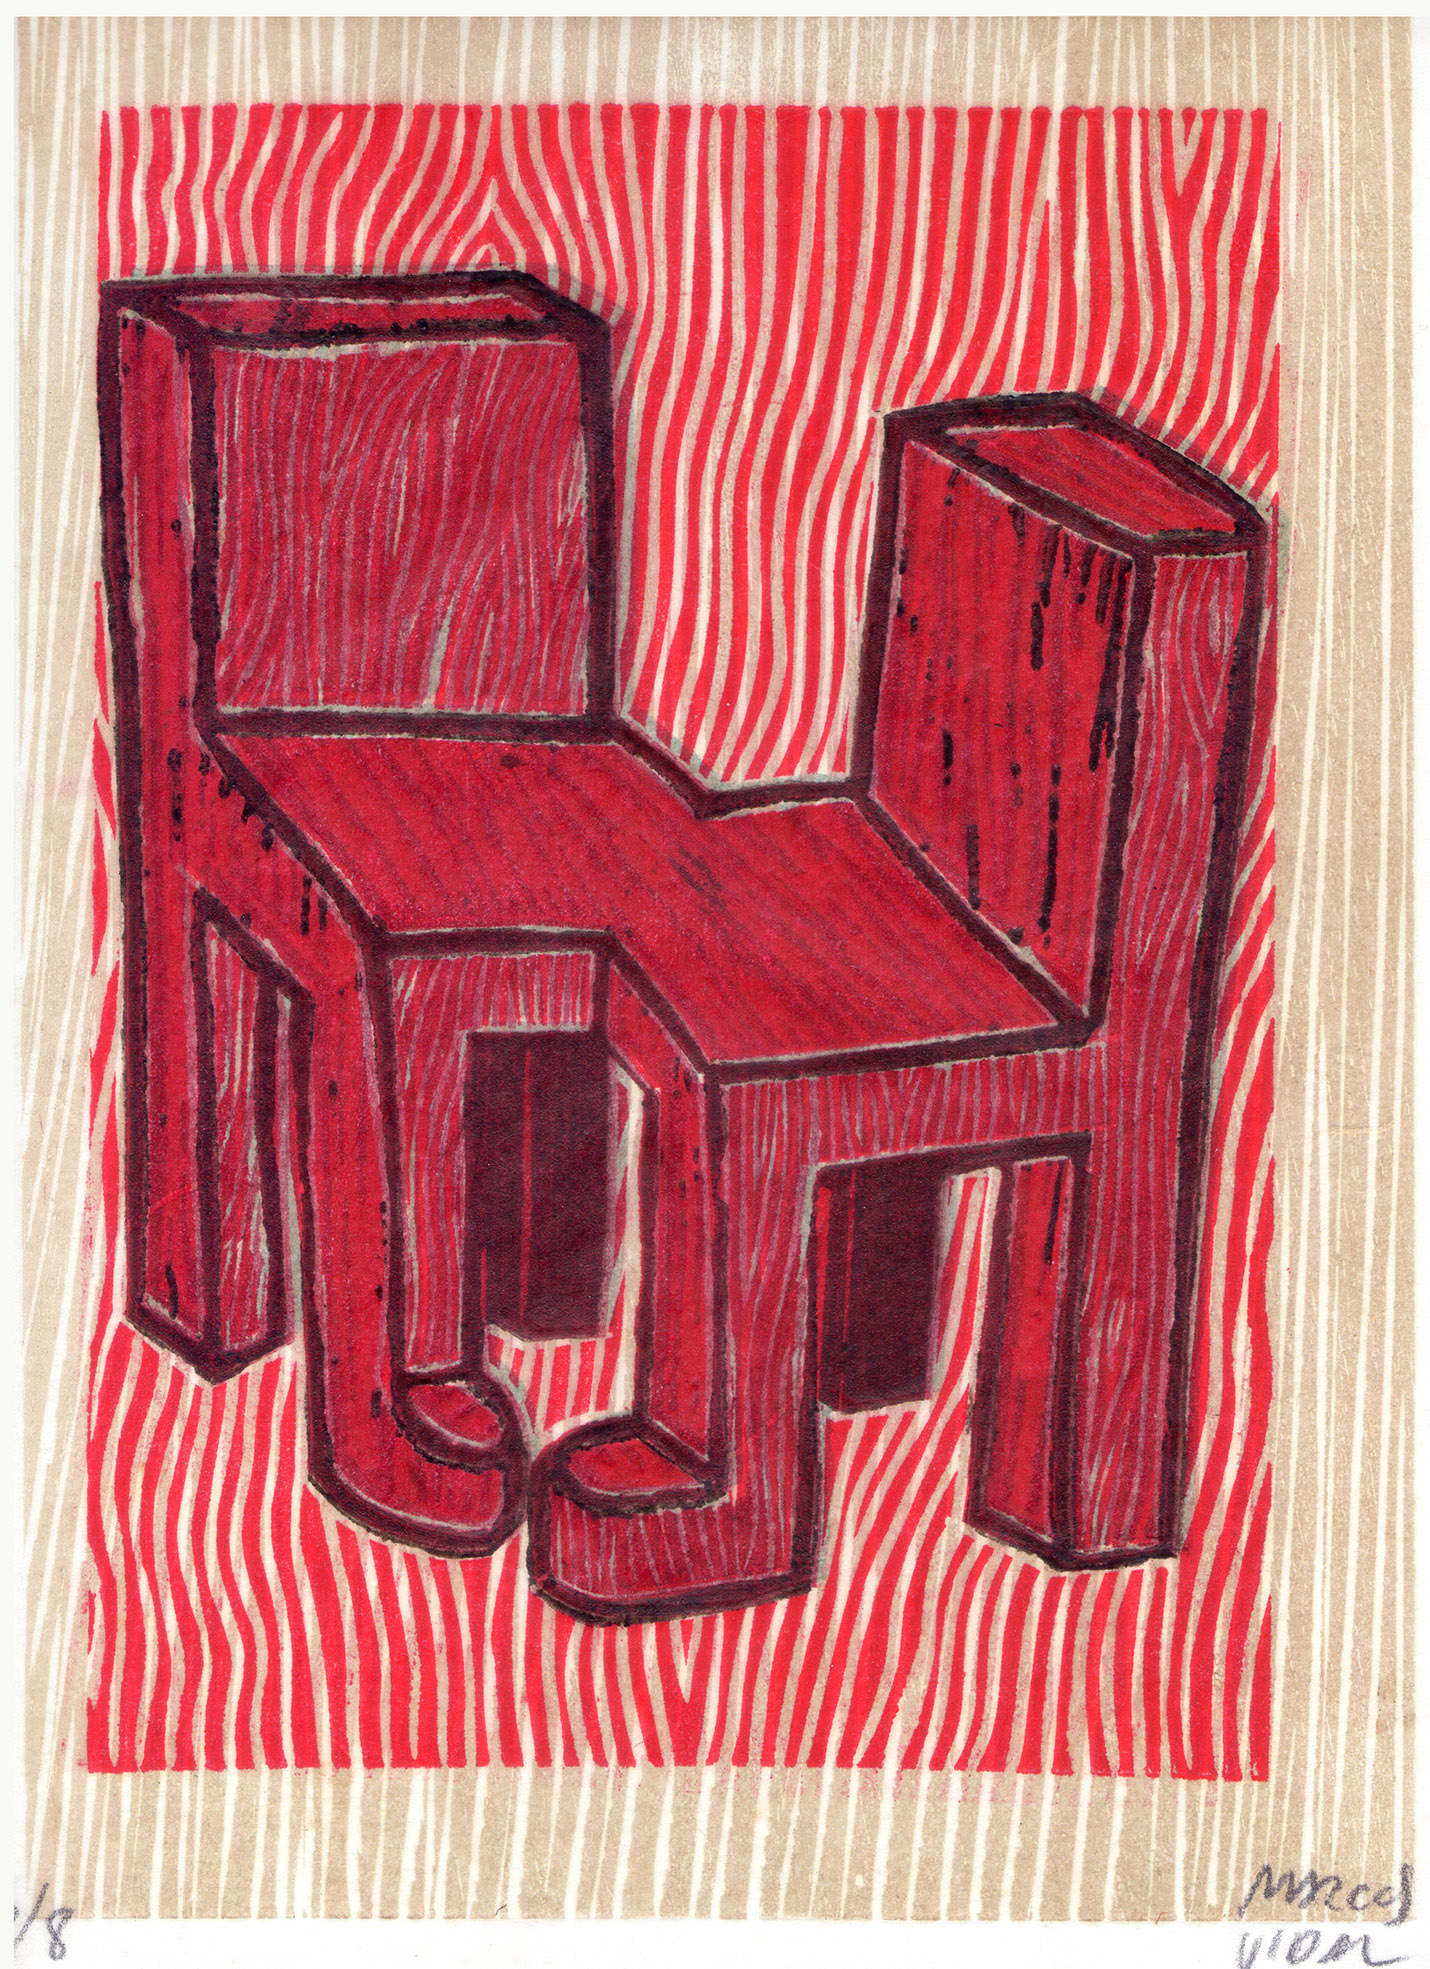 Woodcut on Japanese paper, 32 x 24 cms